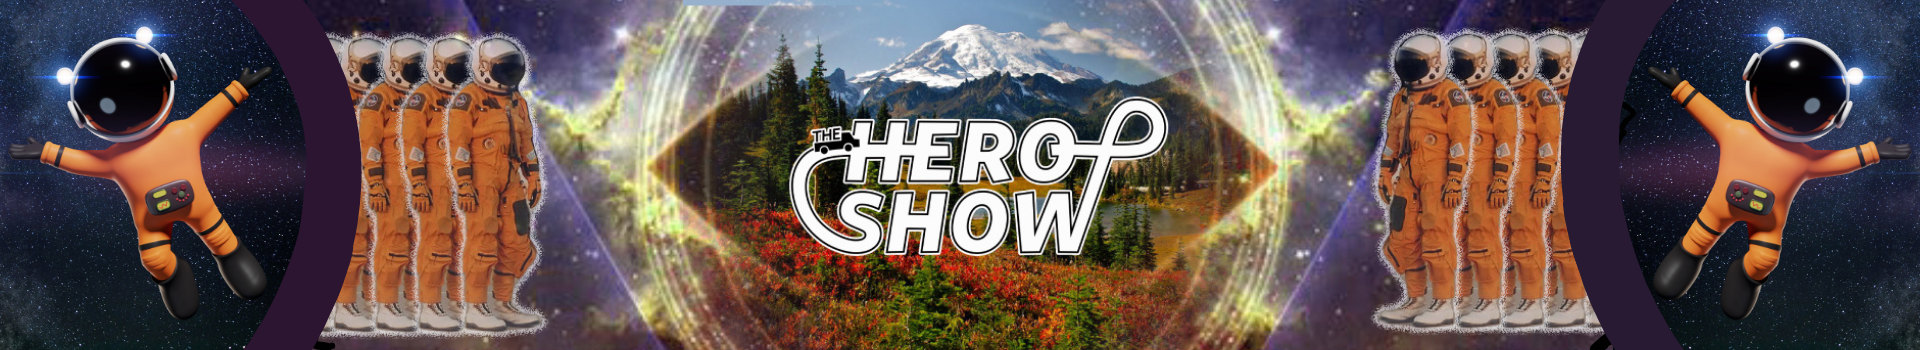 The Hero Show Banner 350